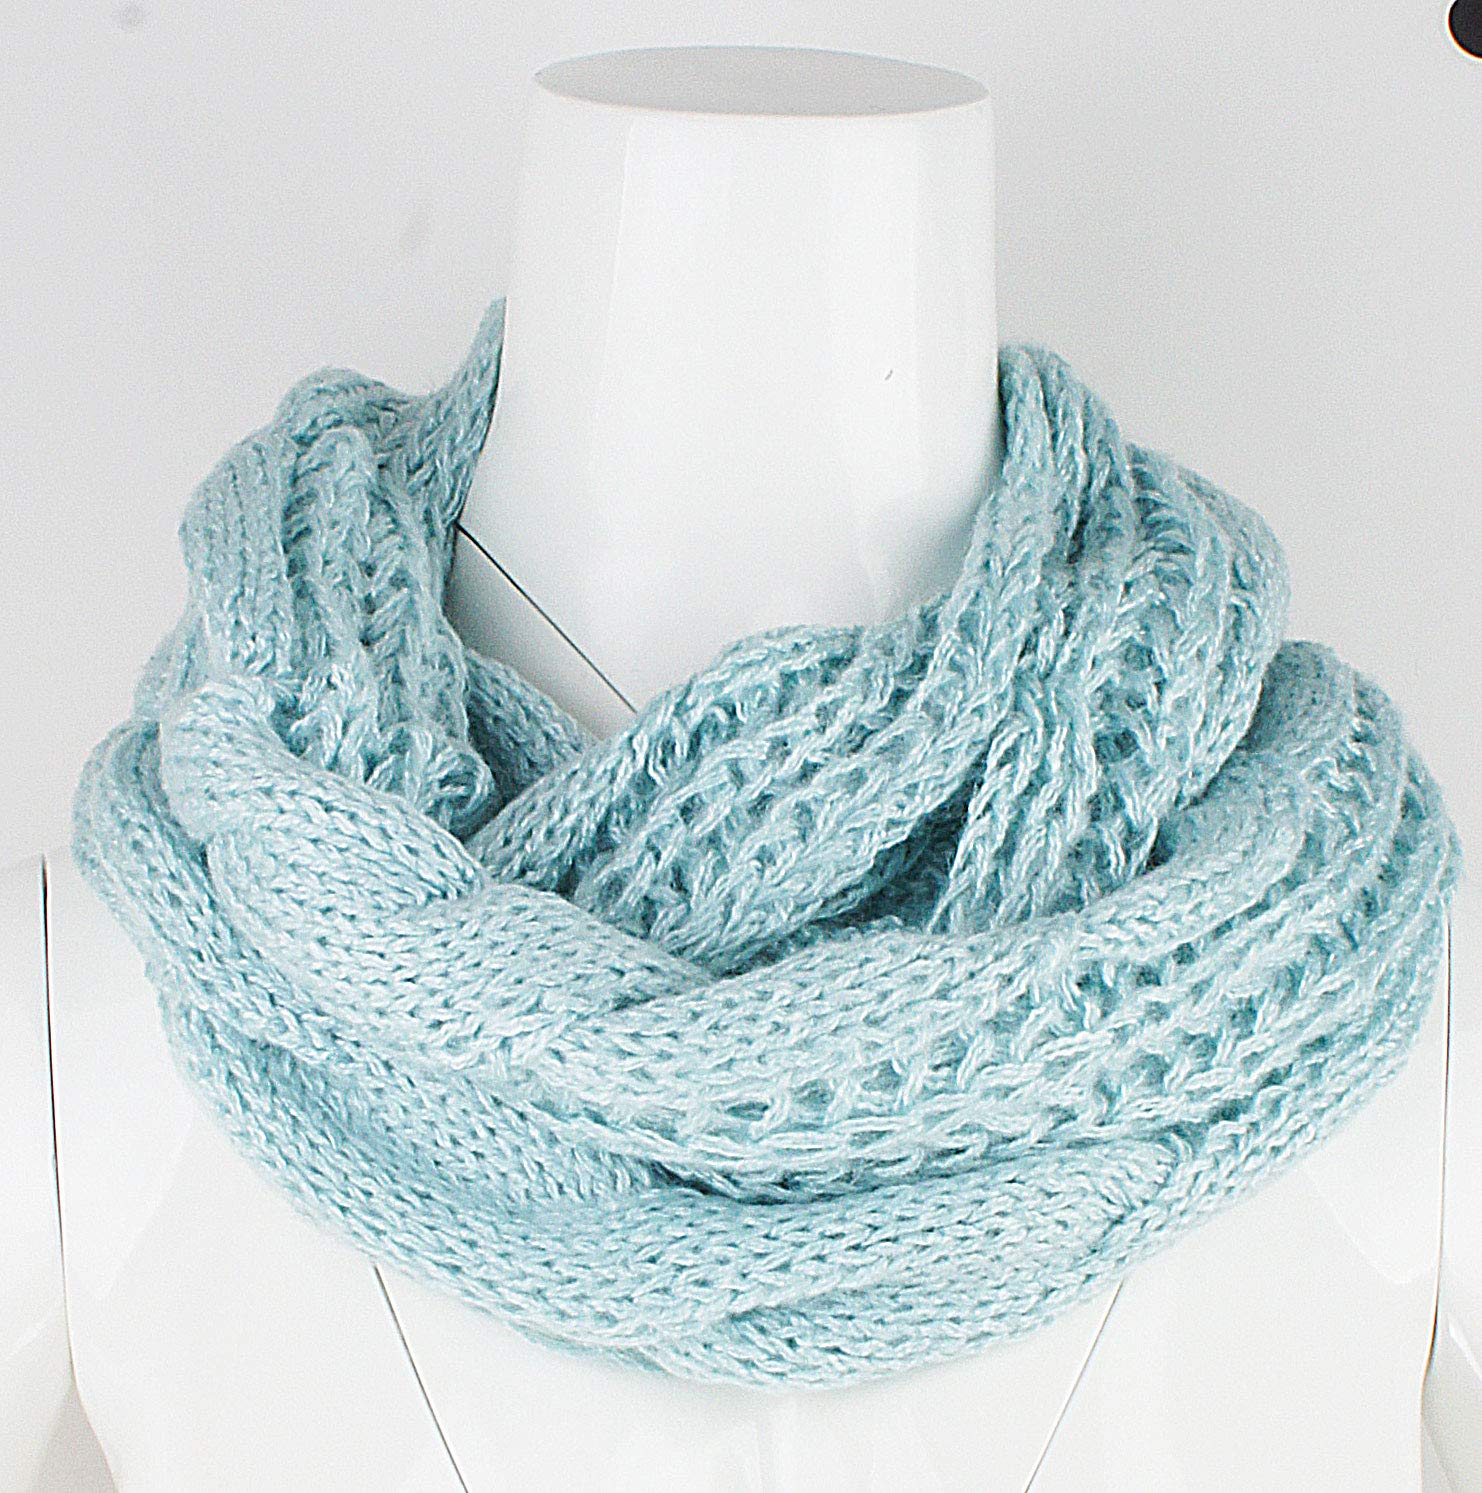 Womens Thick Ribbed Knit Winter Infinity Circle Loop Scarf